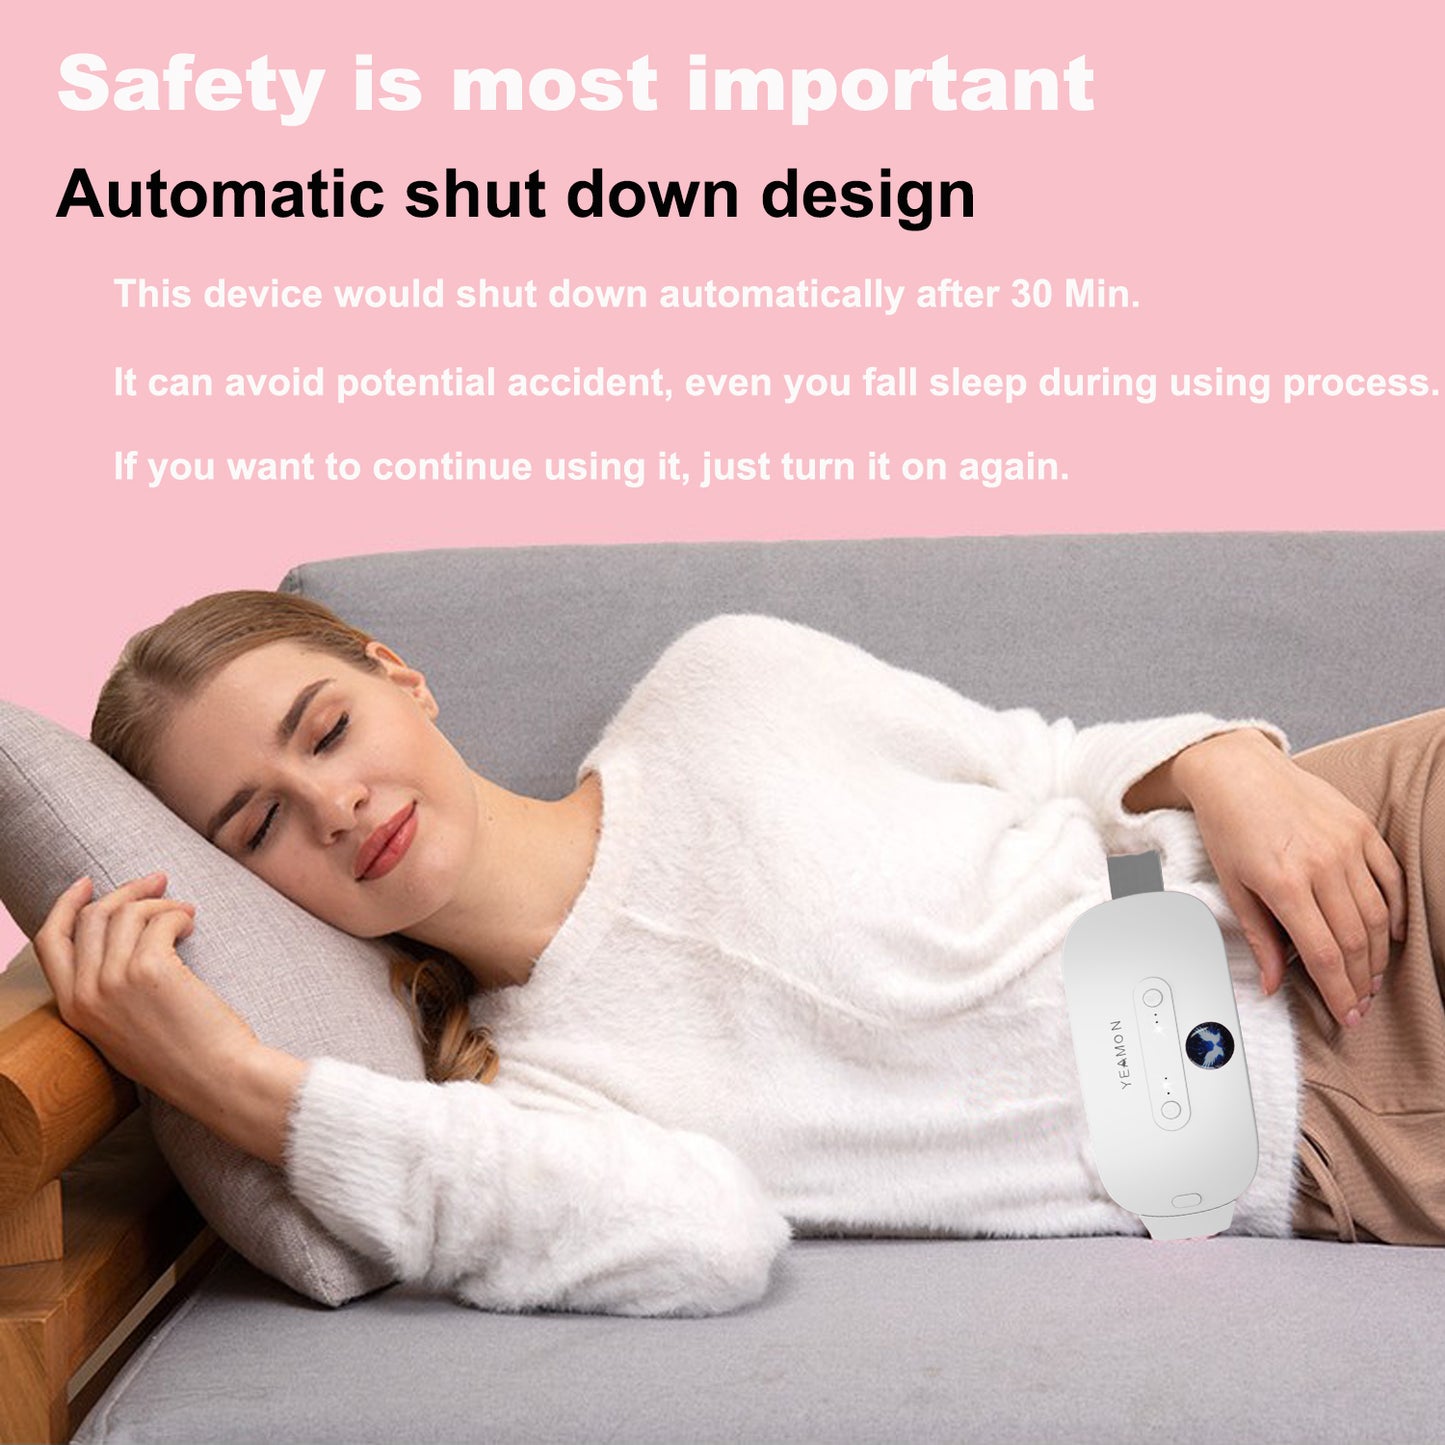 Portable Cordless Heating Pad, Electric Waist Belt Device, Fast Heating Pad with 3 Heat Levels and 3 Massage Modes, Back or Belly Heating Pad for Women and Girl